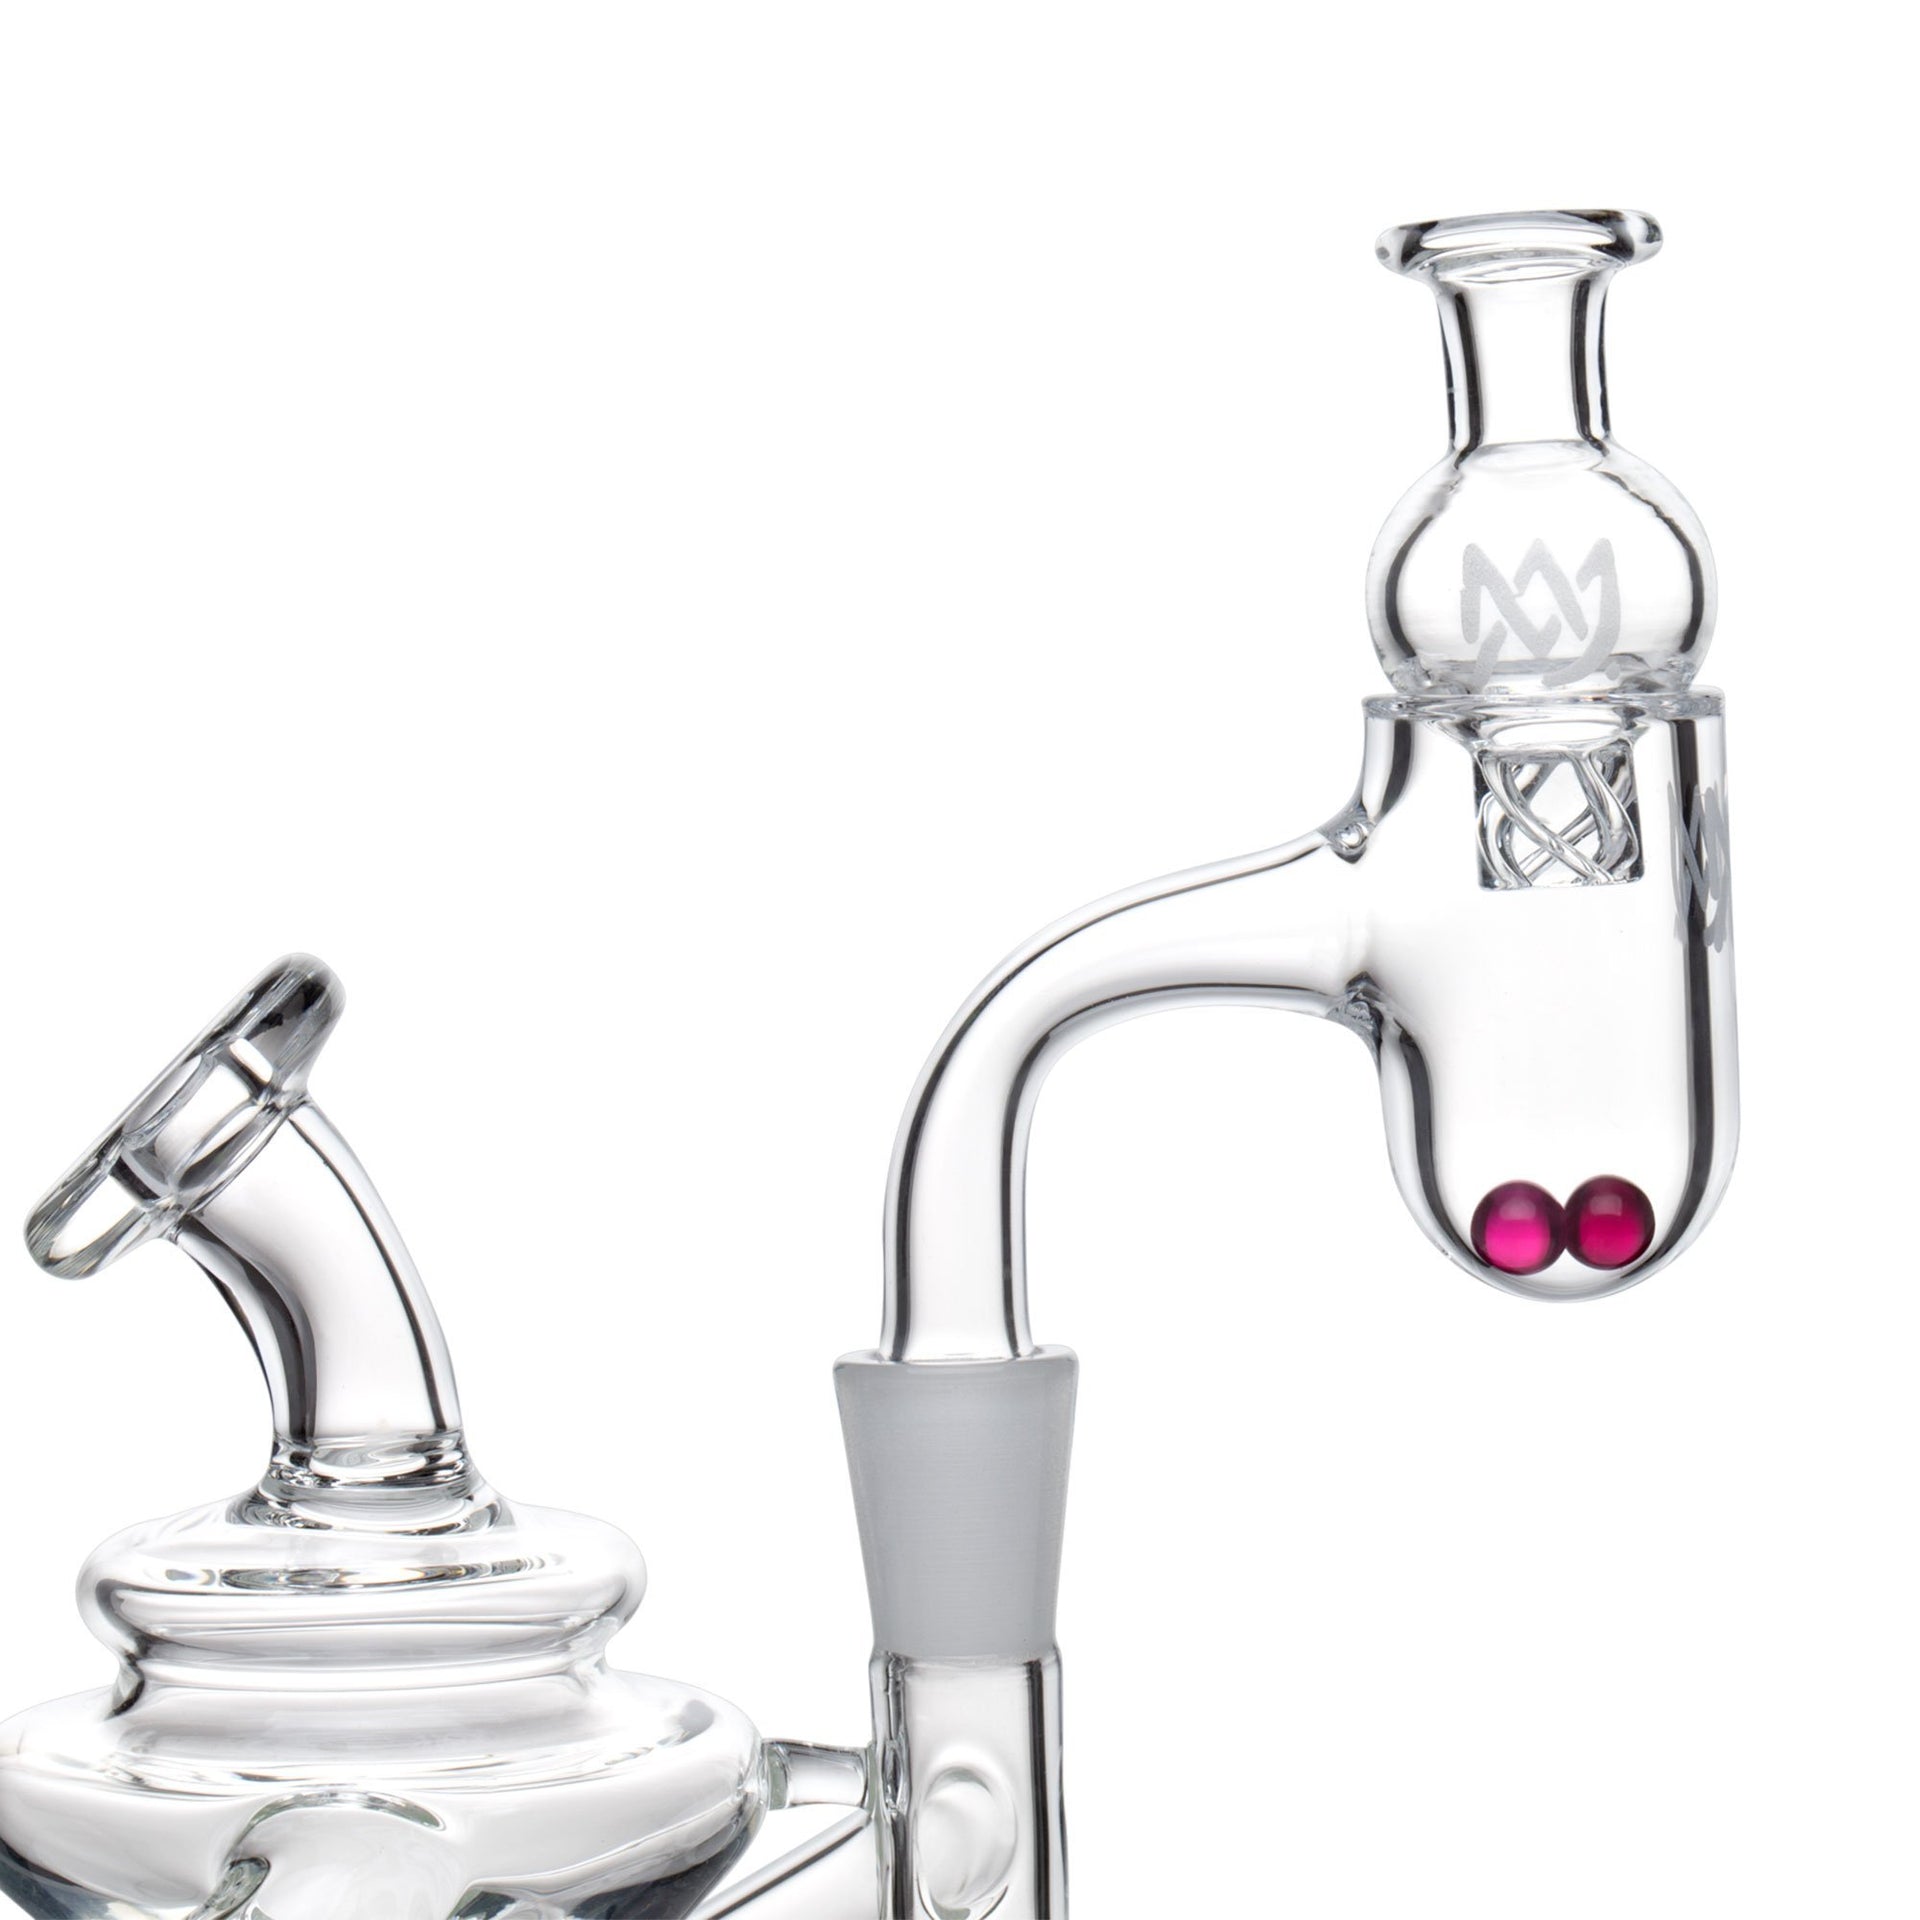 MJ Arsenal Ruby Terp Pearls | Dab Accessories | 420 Science